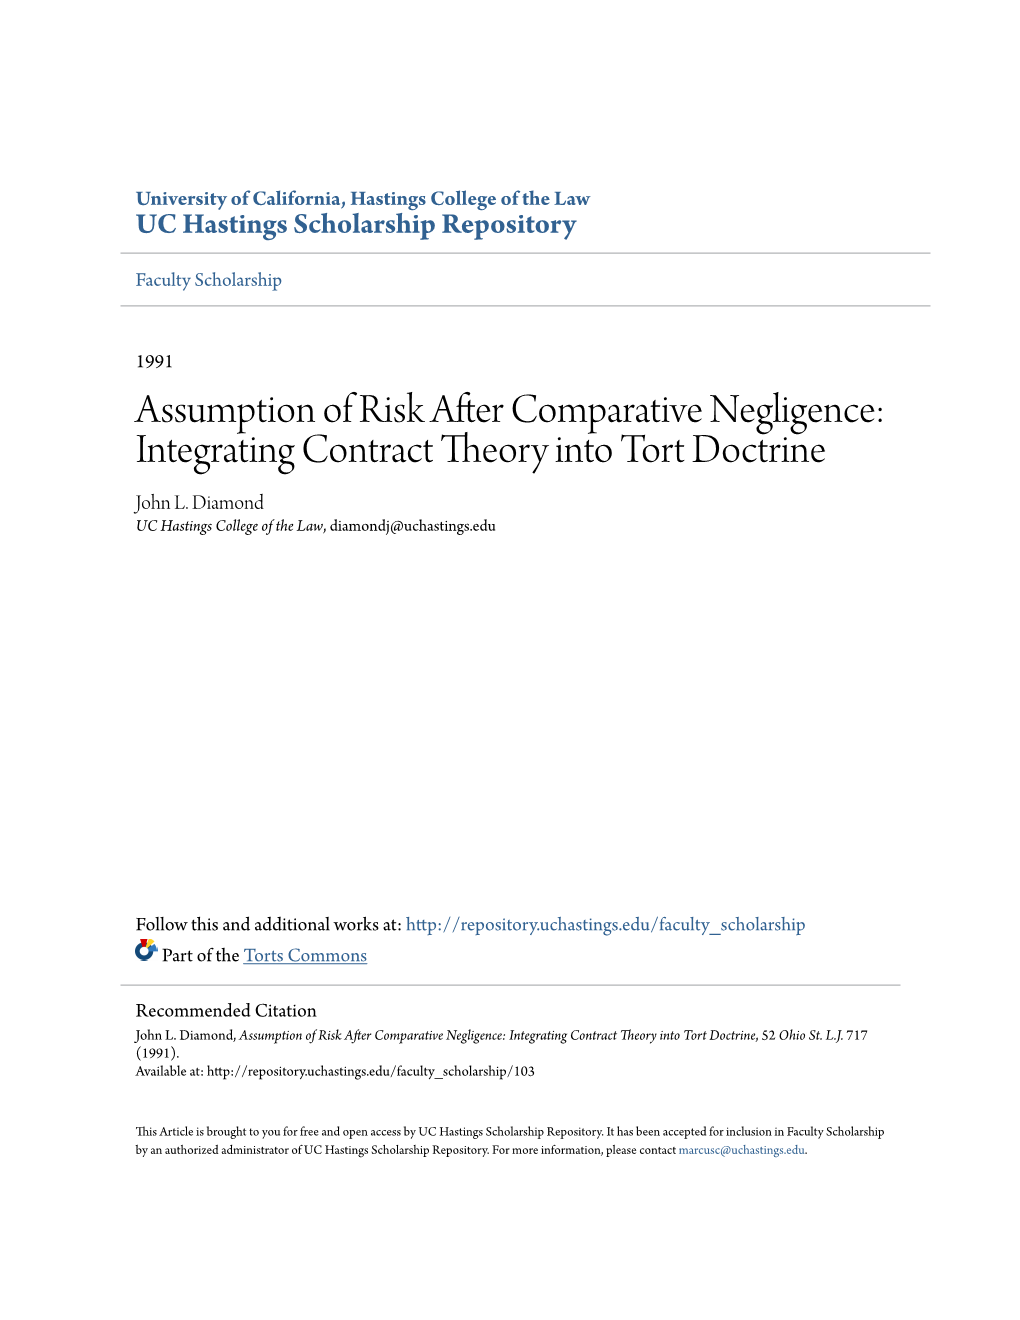 Assumption of Risk After Comparative Negligence: Integrating Contract Theory Into Tort Doctrine John L